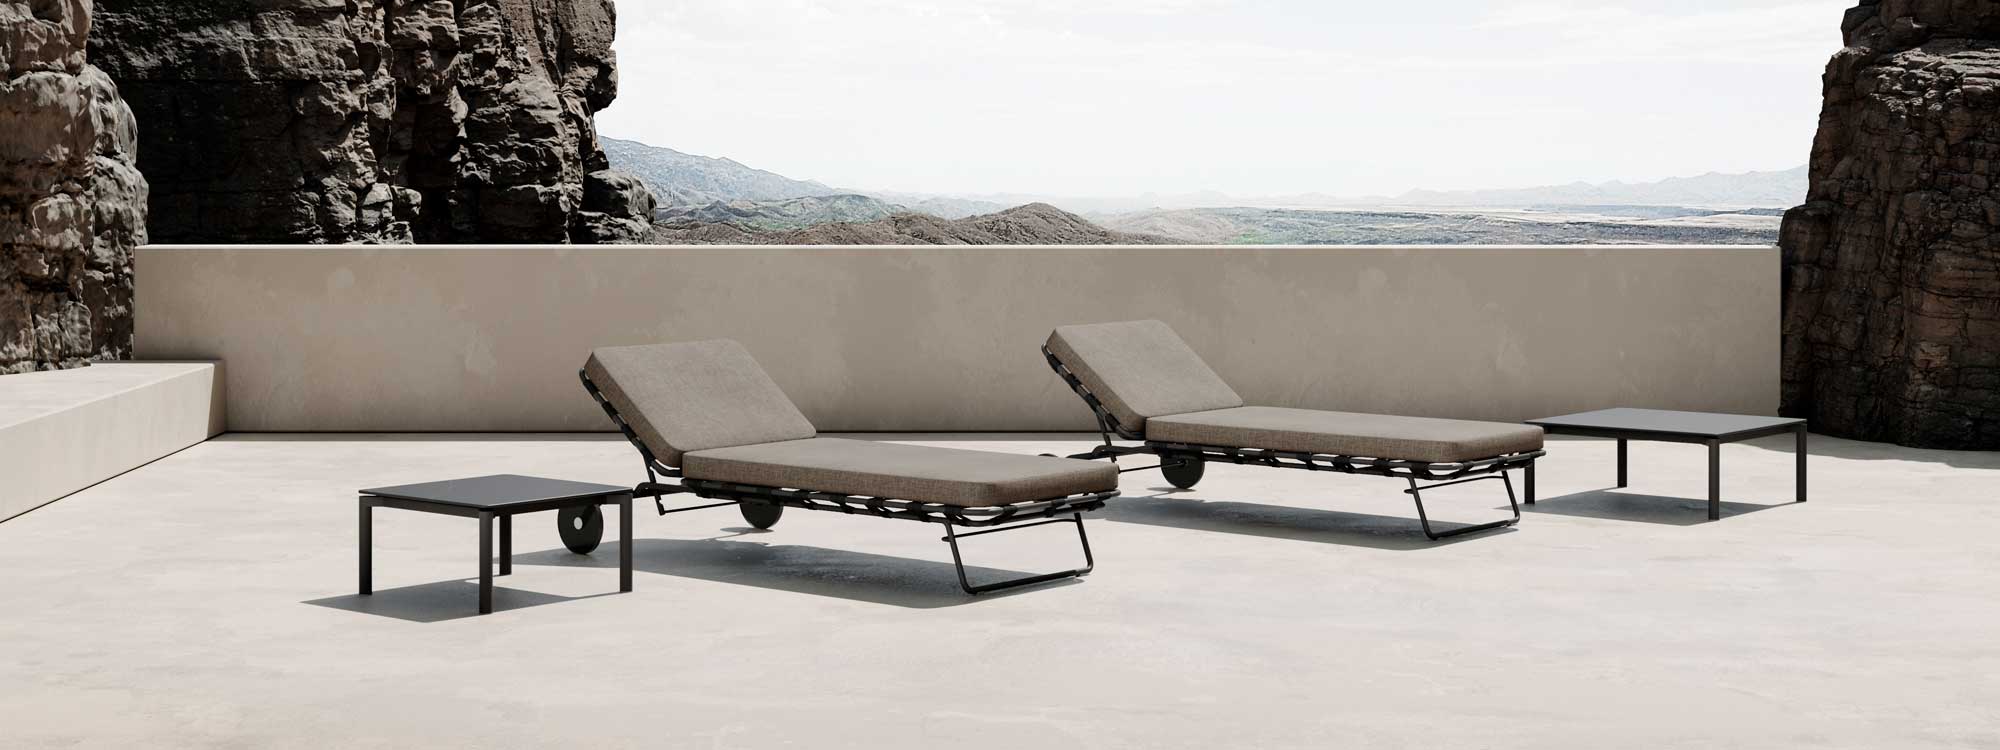 Image of pair of Twist contemporary sun loungers by Oiside, shown on sunny terrace with arid countryside in the background